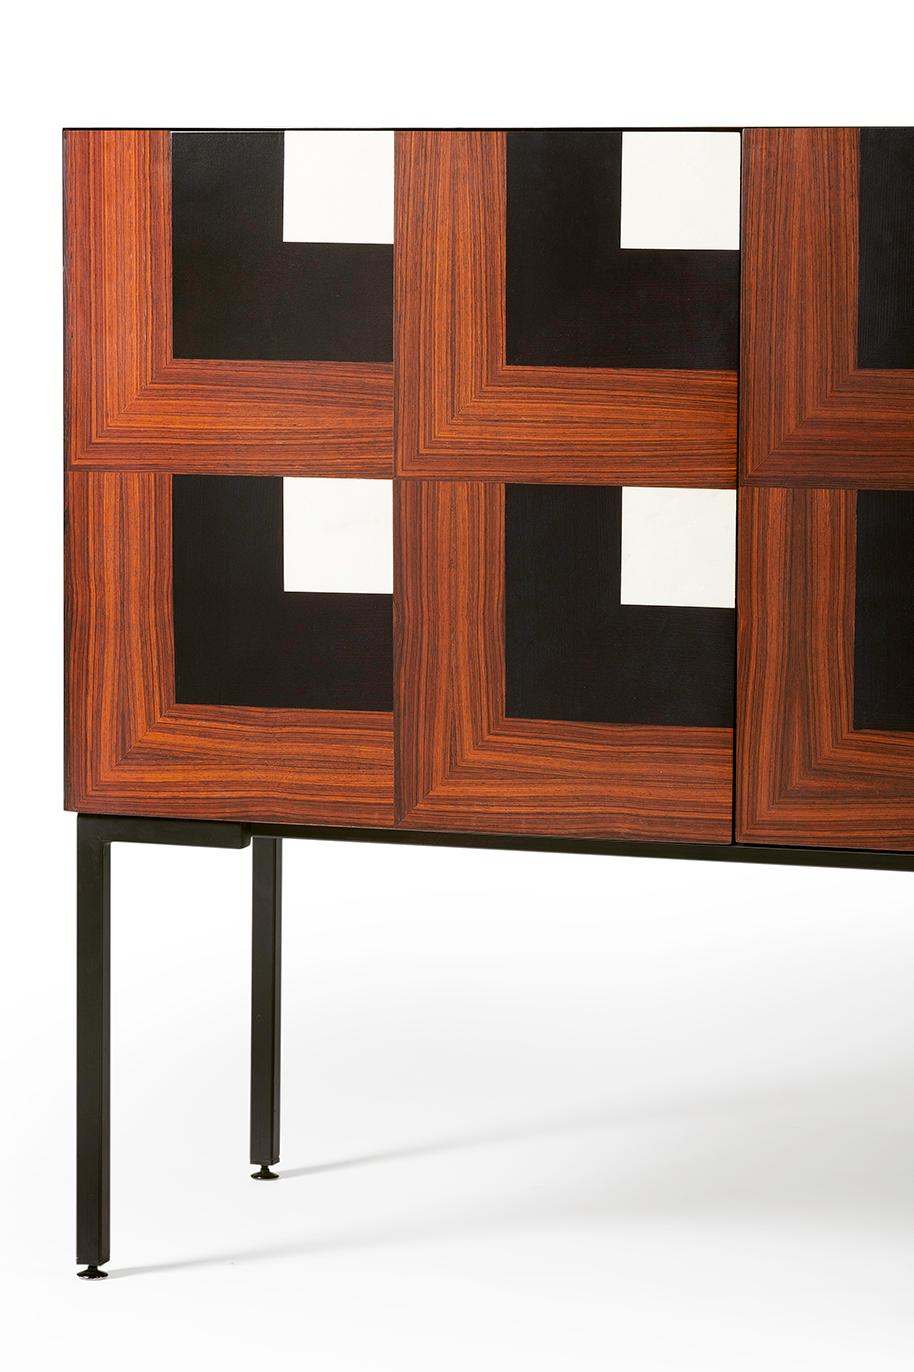 Veneer 21st Century Cubo Inlaid Sideboard in Ash, Maple, Walnut, Made in Italy, Hebanon For Sale